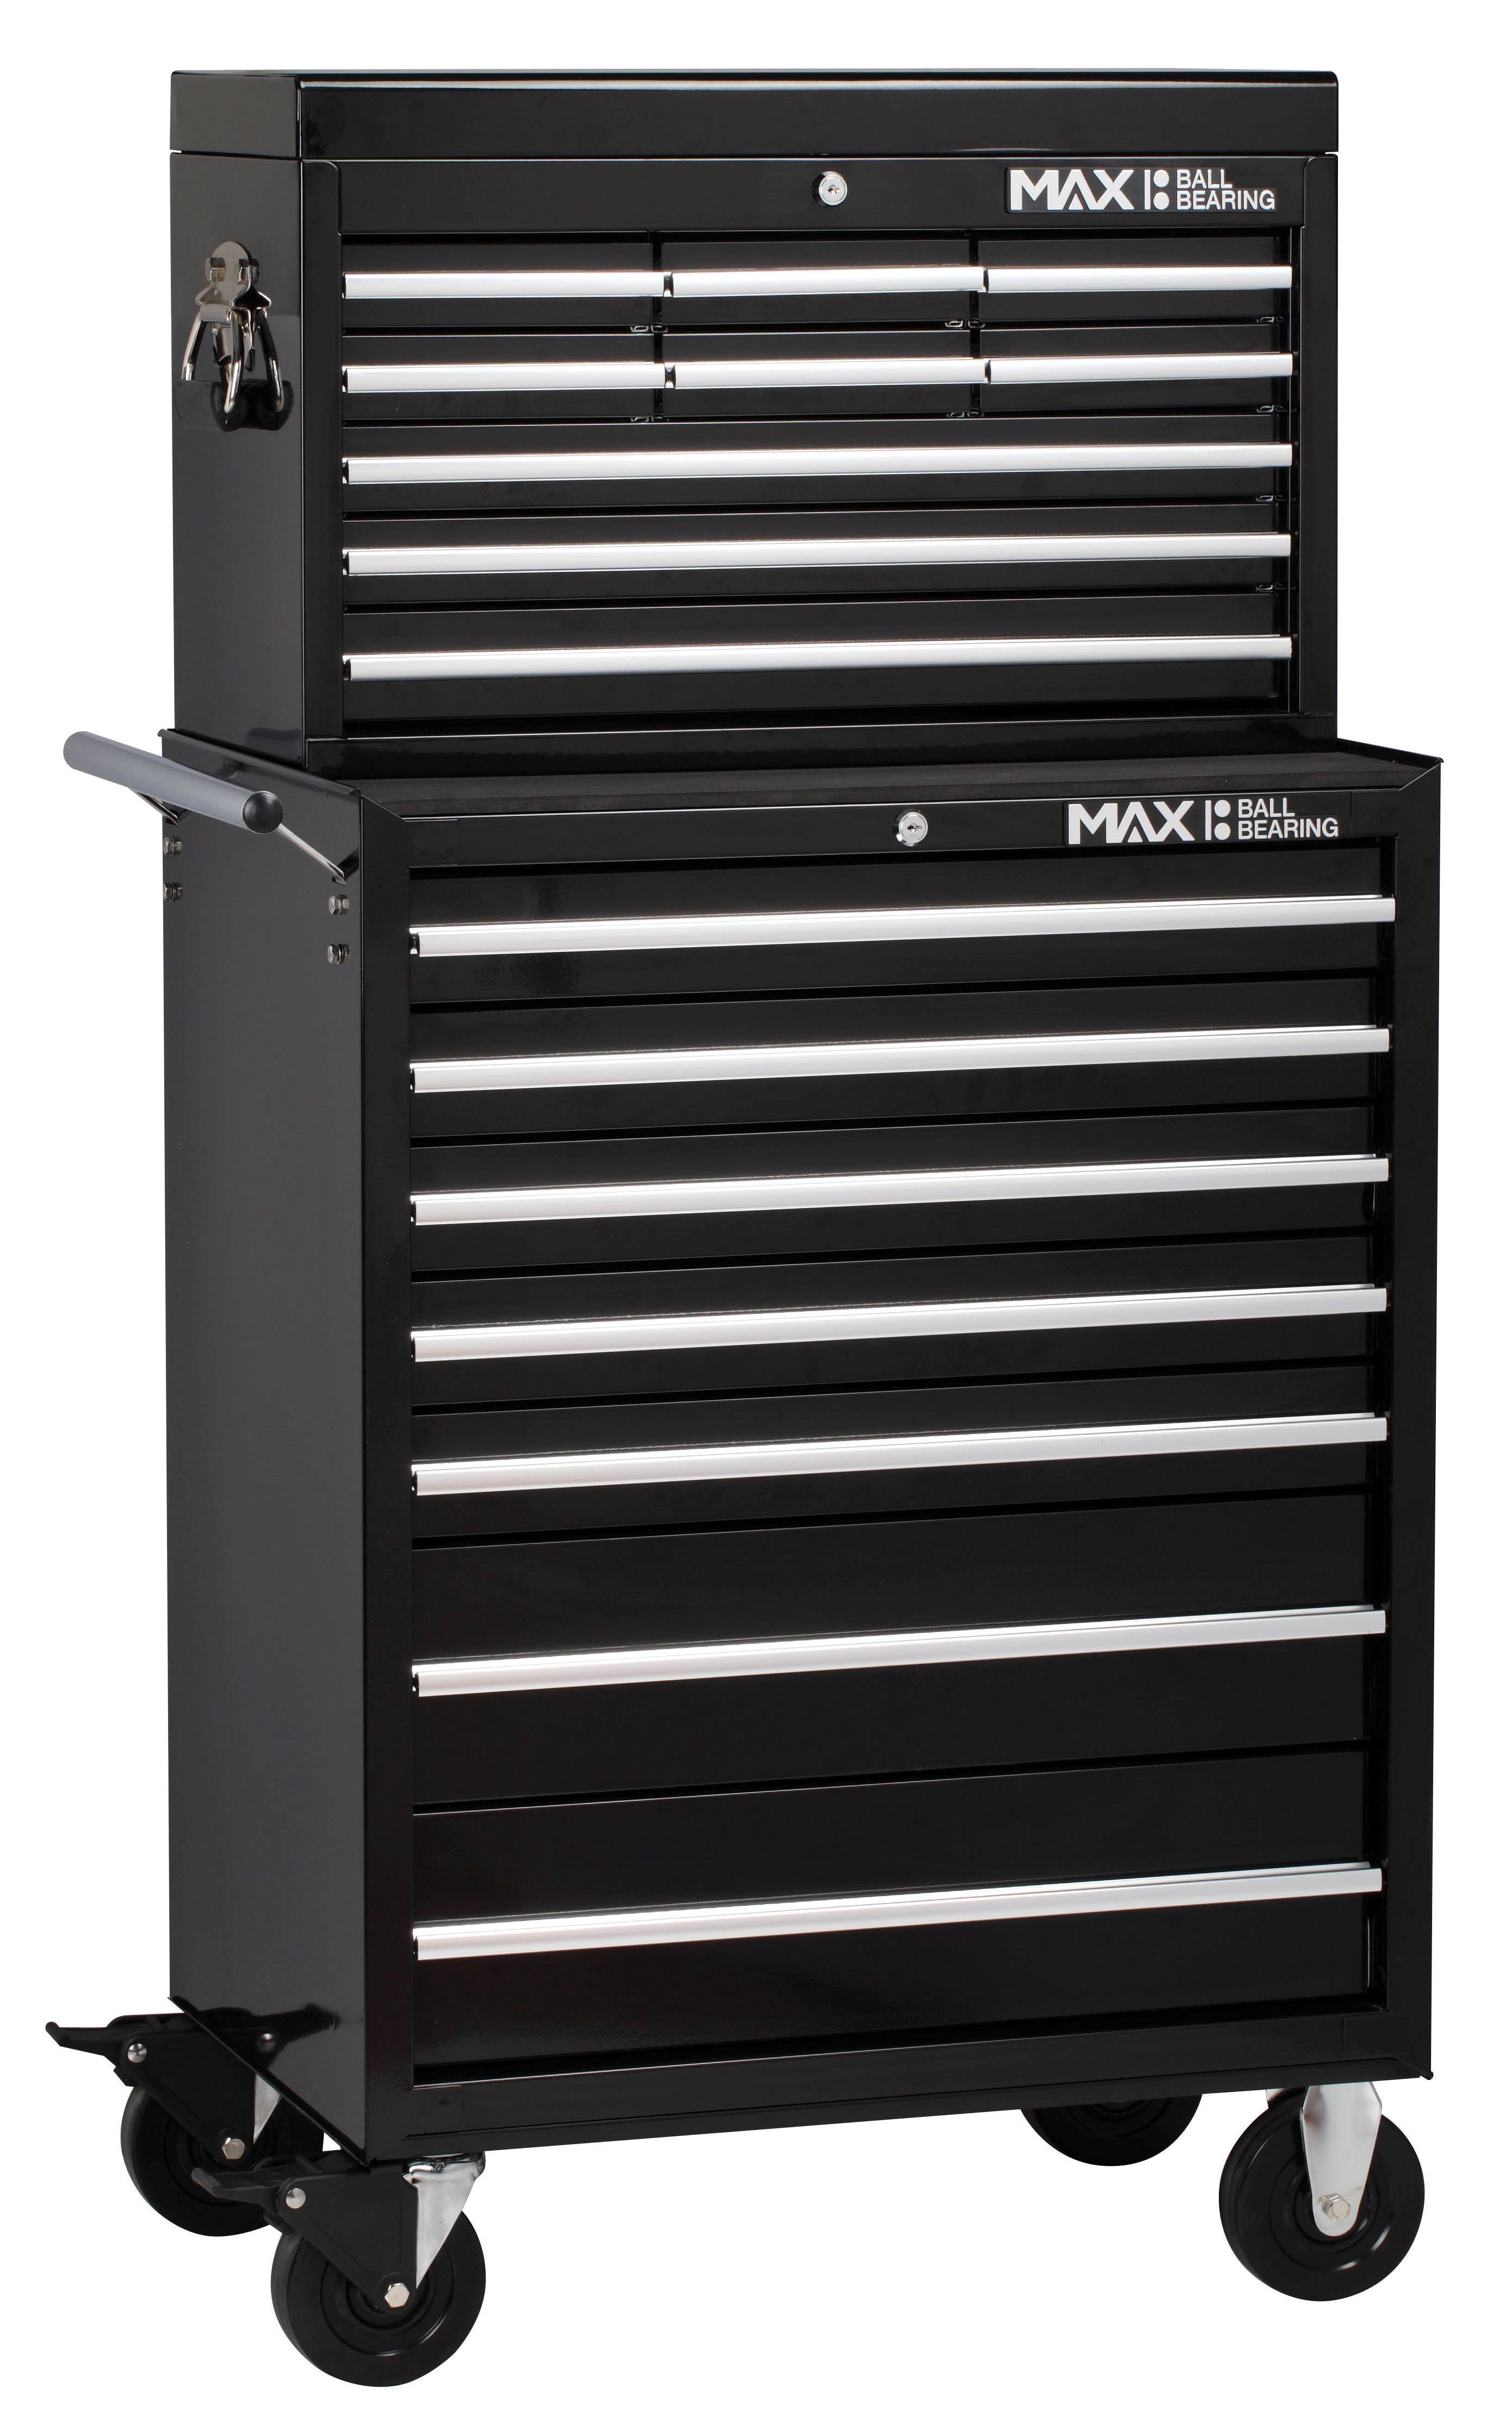 Hilka Professional 16 Drawer Tool Chest and Trolley Combination Unit - Black